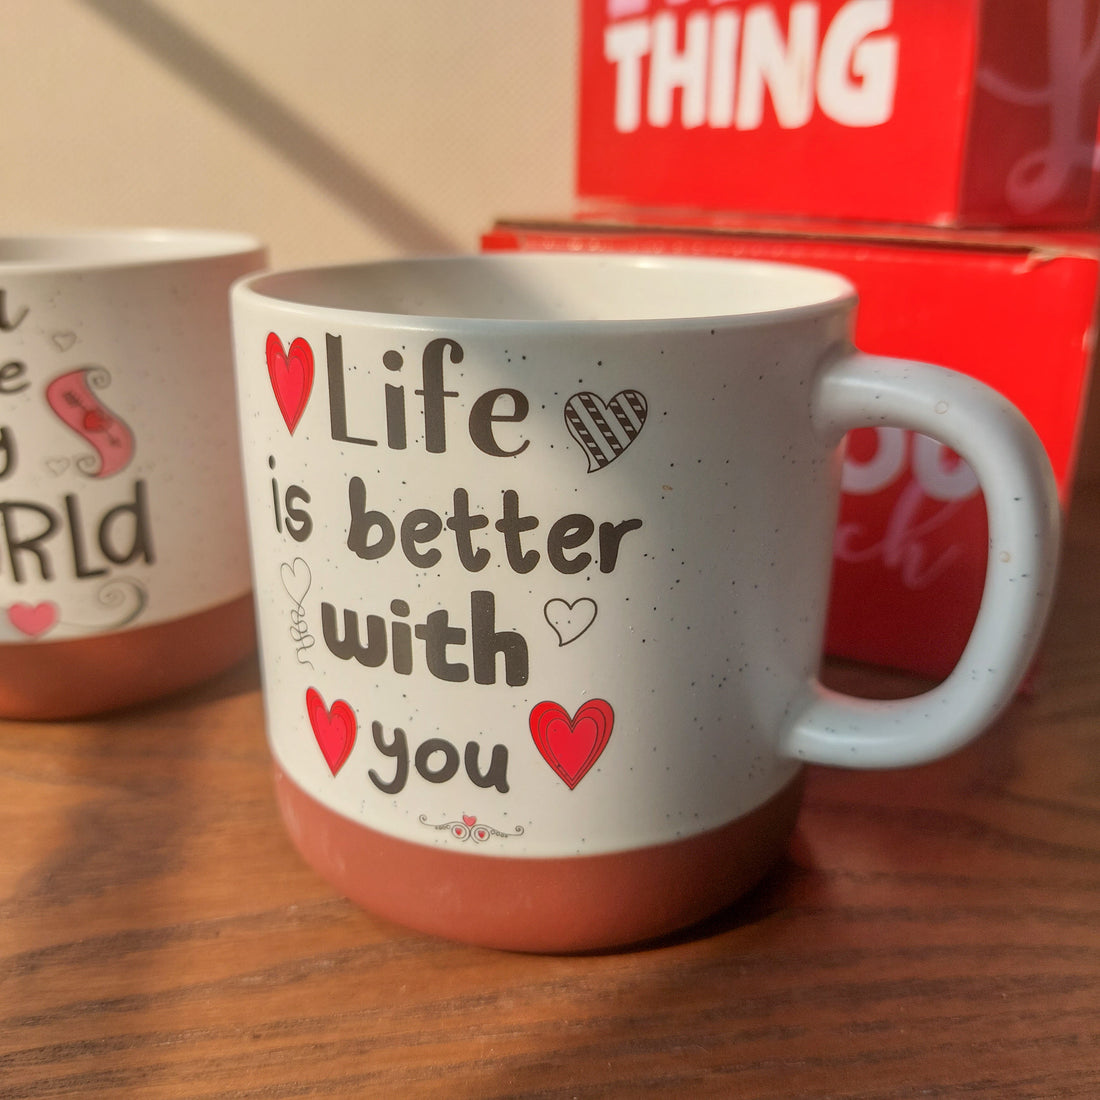 Life Is Better With You Ceramic Mug - 1 pc